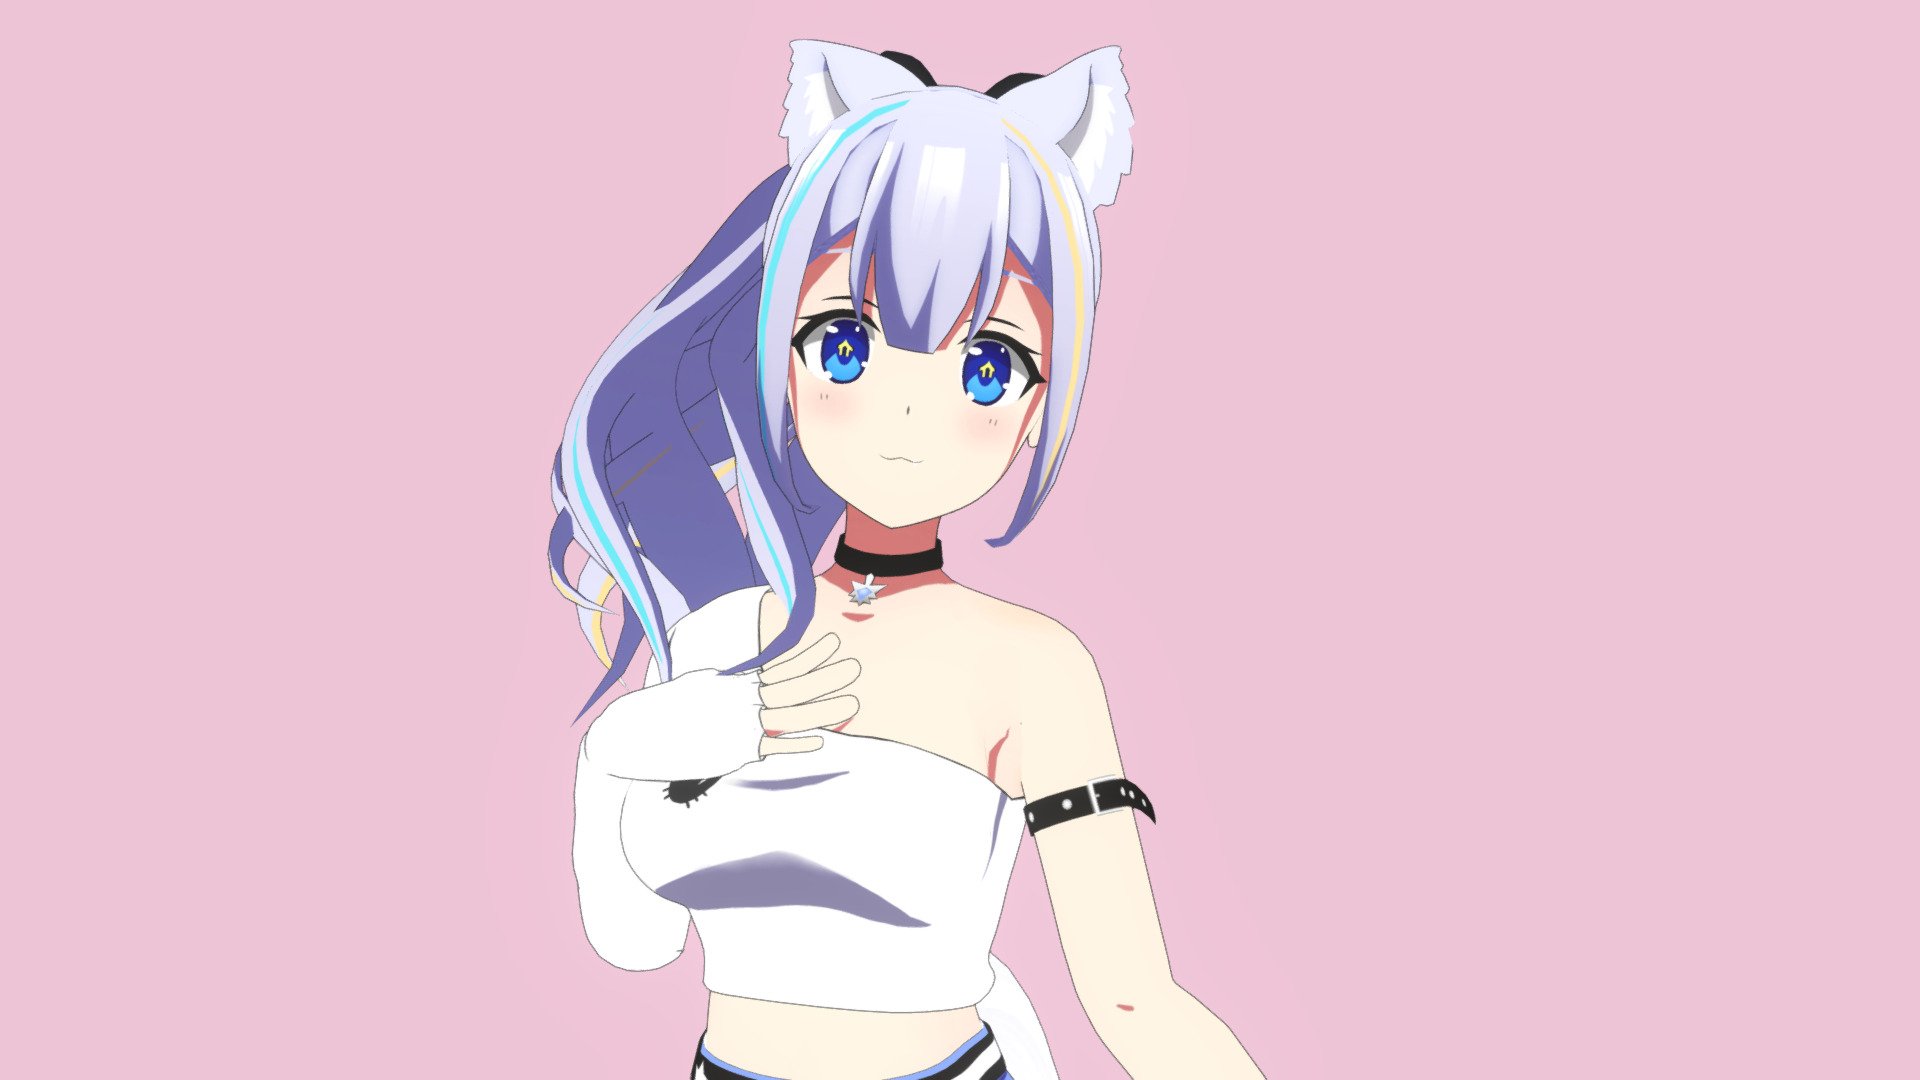 Commission work for Vtuber model Nunki from Amber Glow. Modelled, Rigged and Textured in blender.
Check out her channel: https://twitter.com/nunki_dayo

Follow me on Twitter: https://twitter.com/antro3dcg

I’m open for commissions. My card: https://antro.carrd.co


 - Nunki - Amber Glow Commission Work - 3D model by Antro (@Antro3d) 3d model